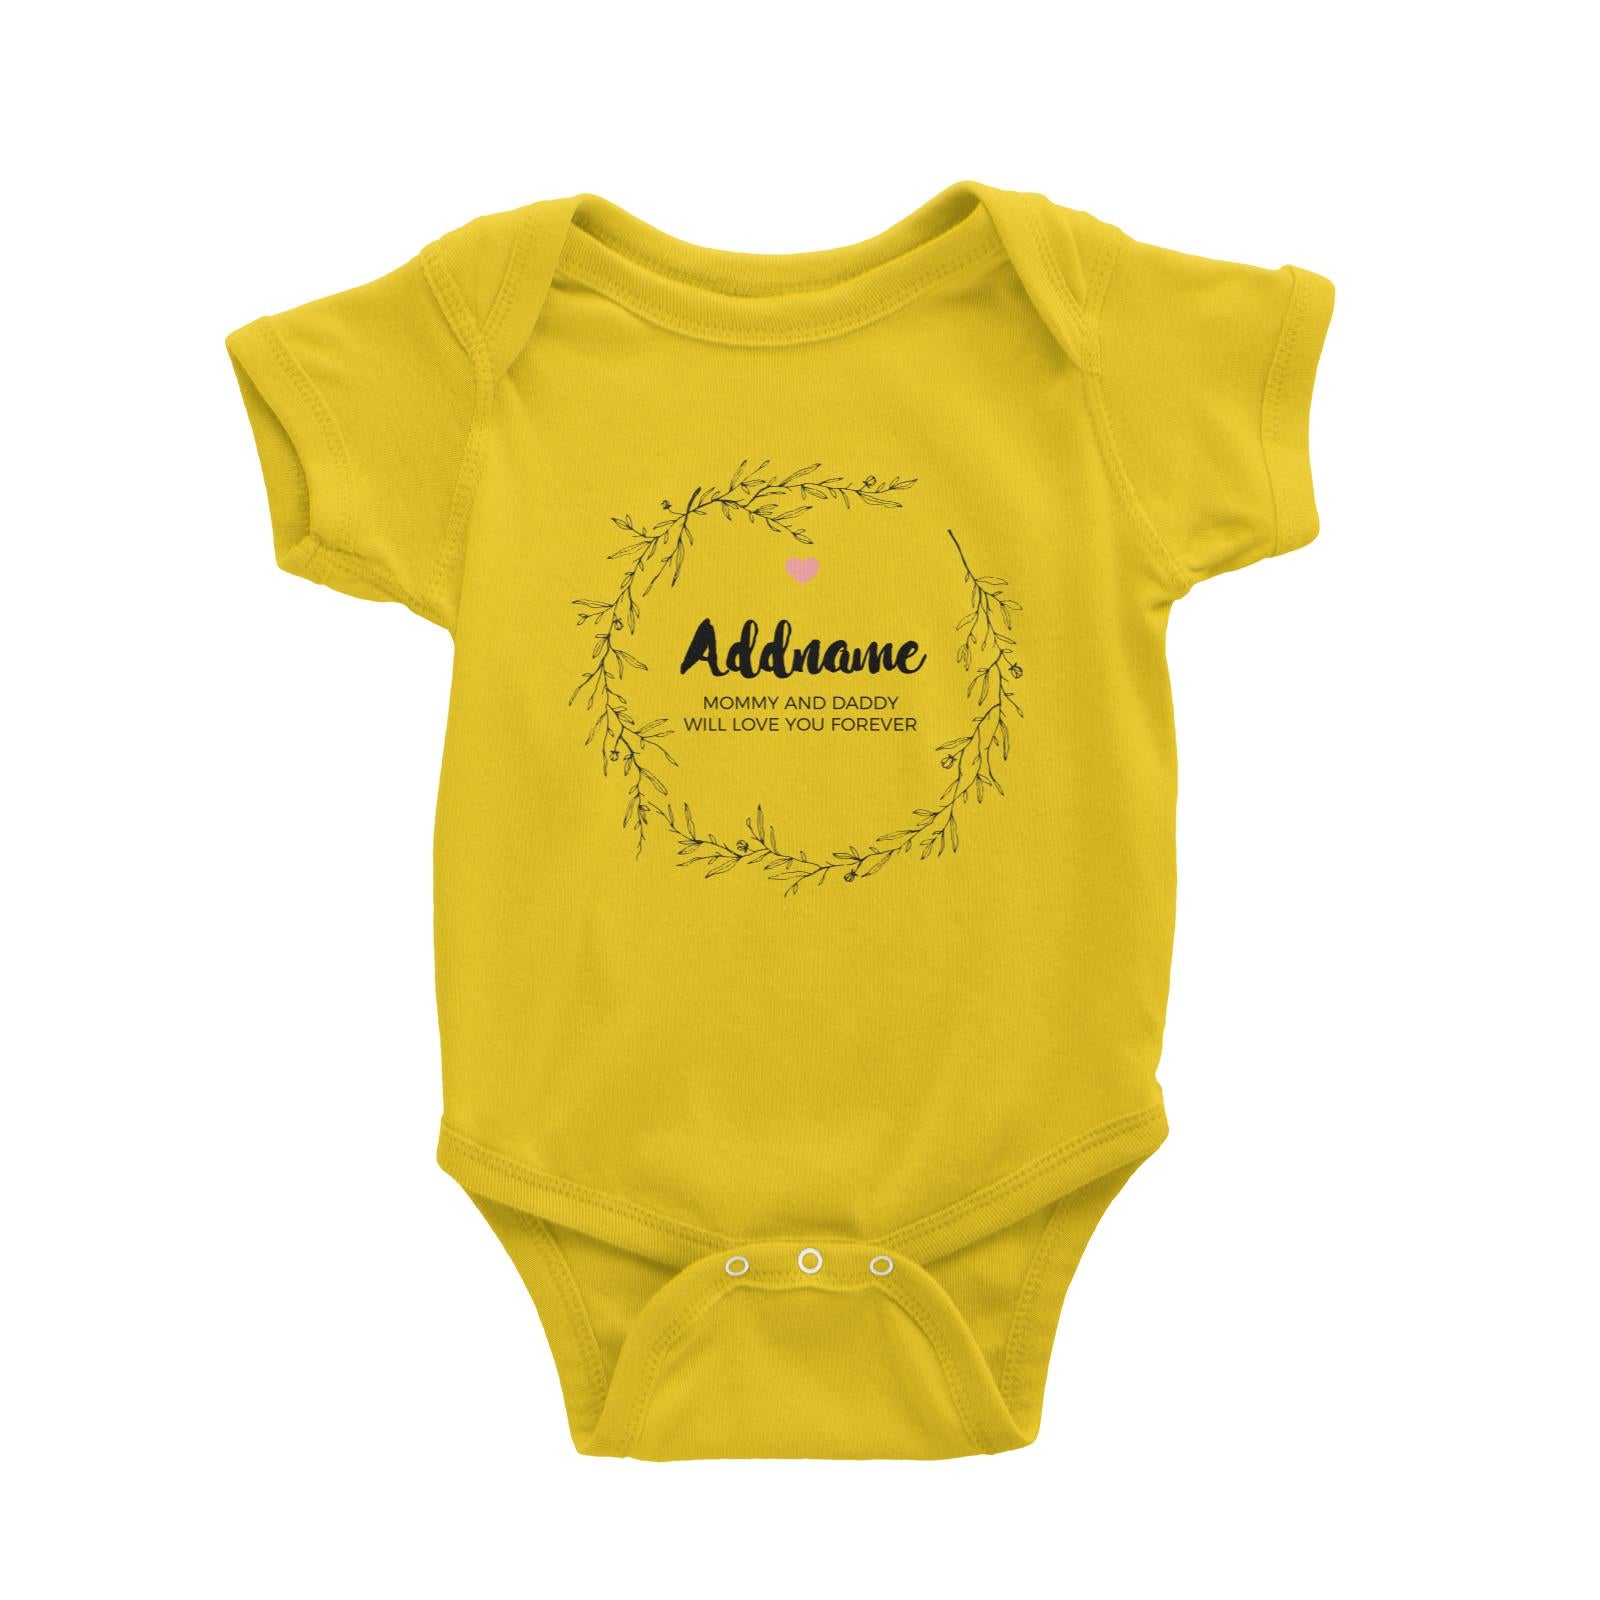 Doodle Wreath Personalizable with Name and Text Baby Romper